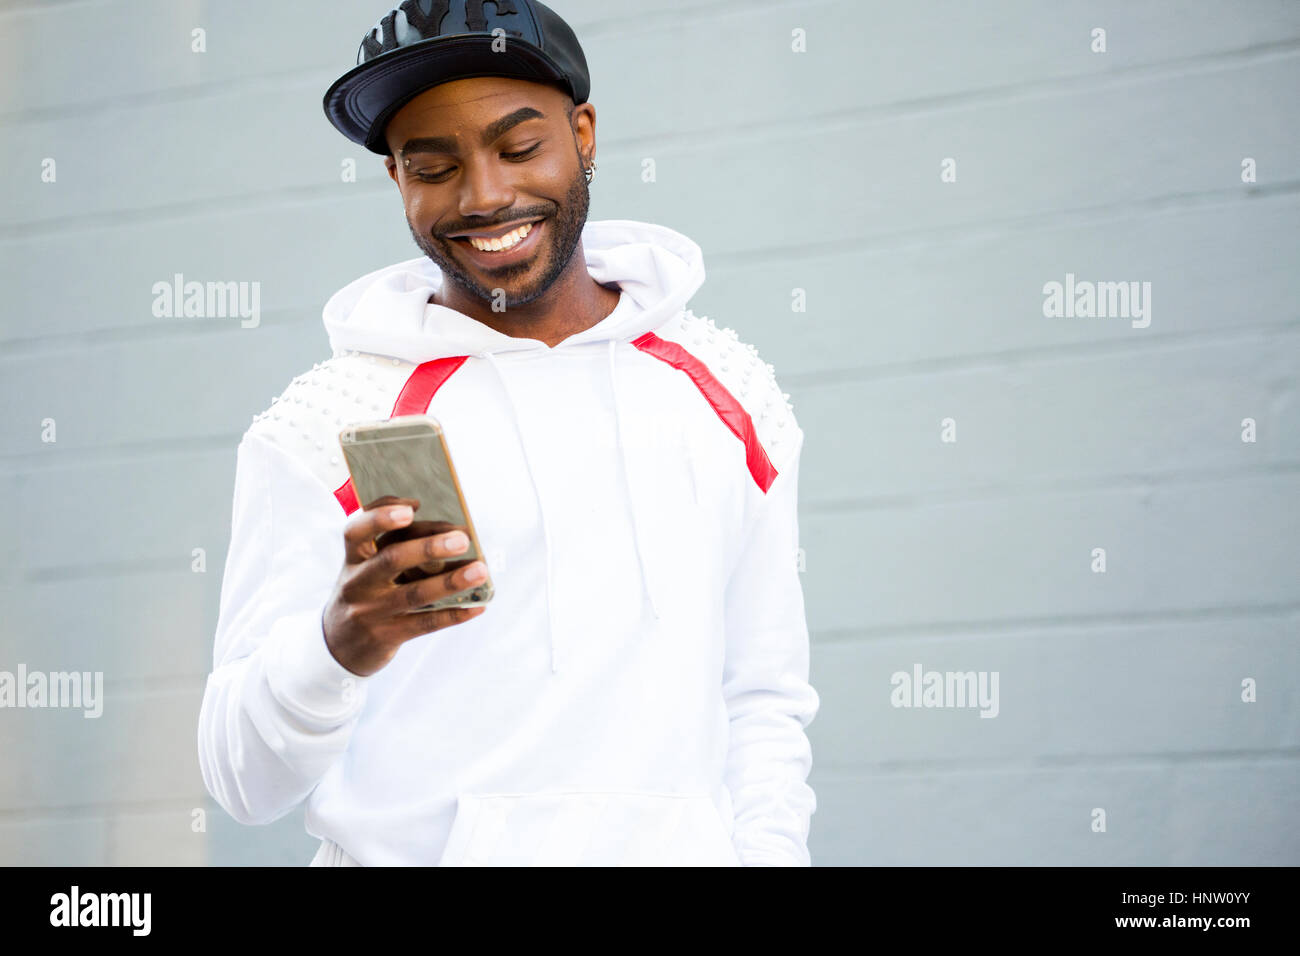 Smiling Black man texting on cell phone Banque D'Images